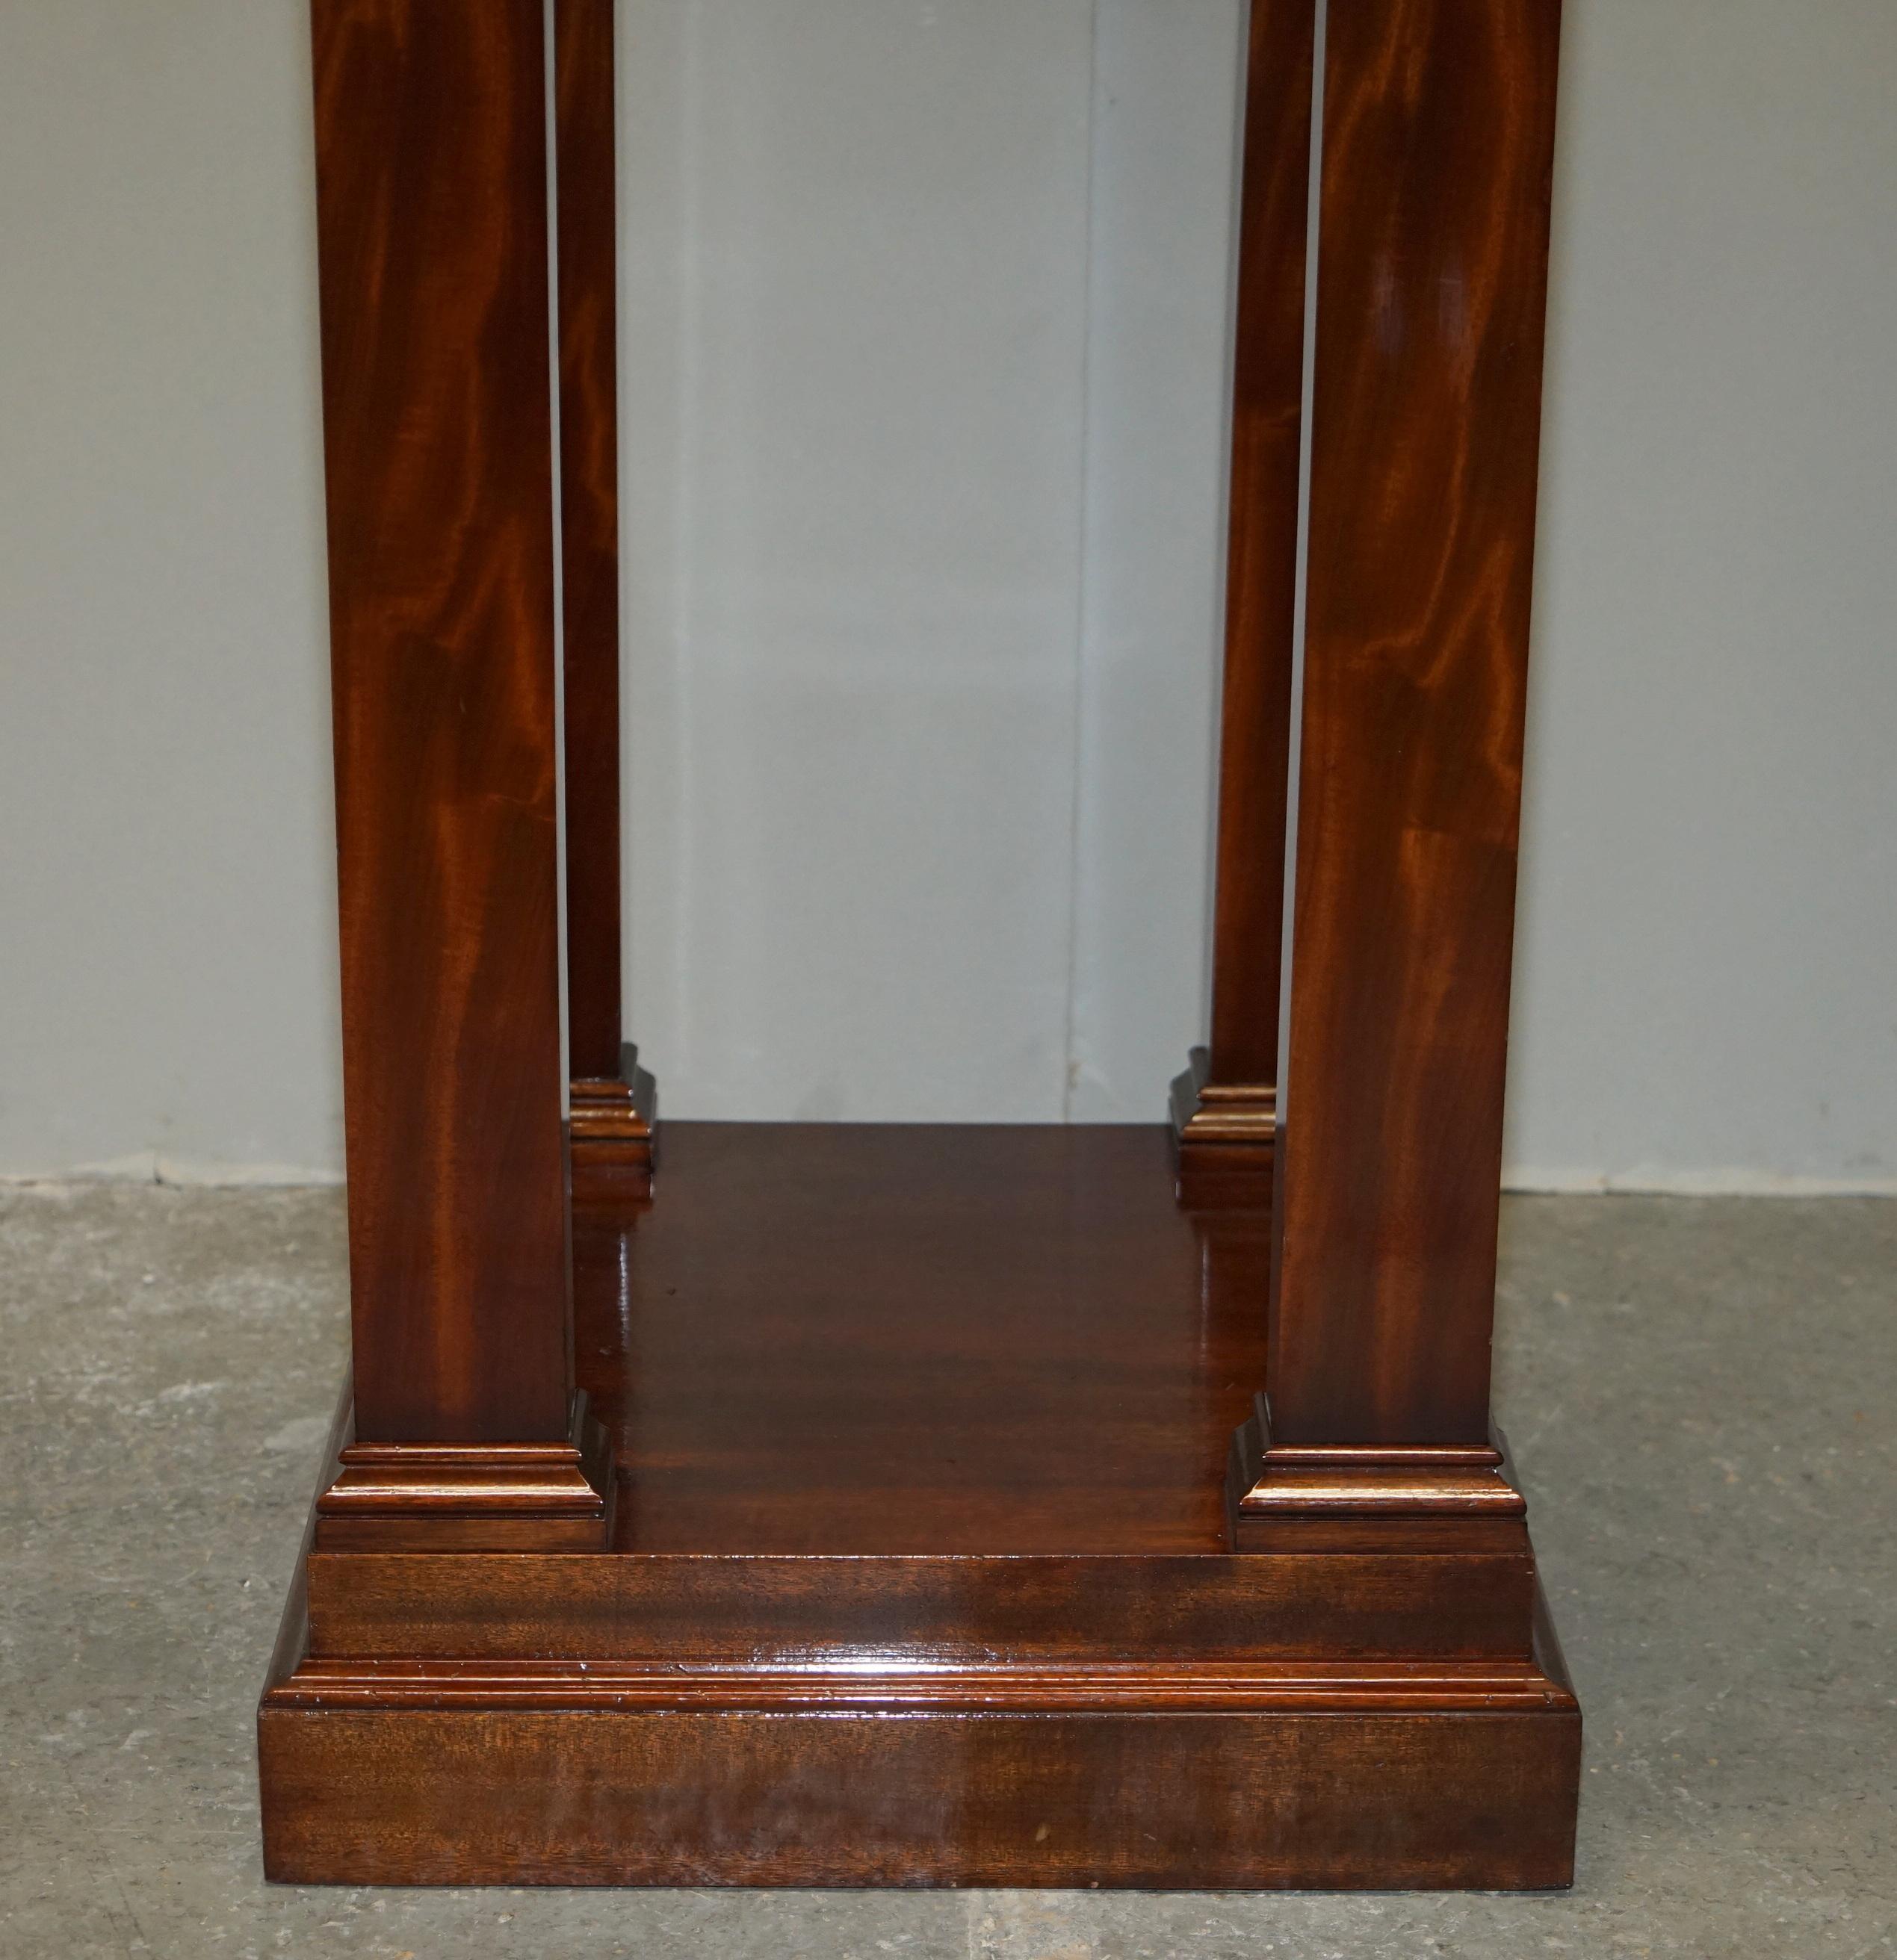 Hand-Crafted Antique Flamed Hardwood Pedestal from Princess Diana's Family Home Spencer House For Sale